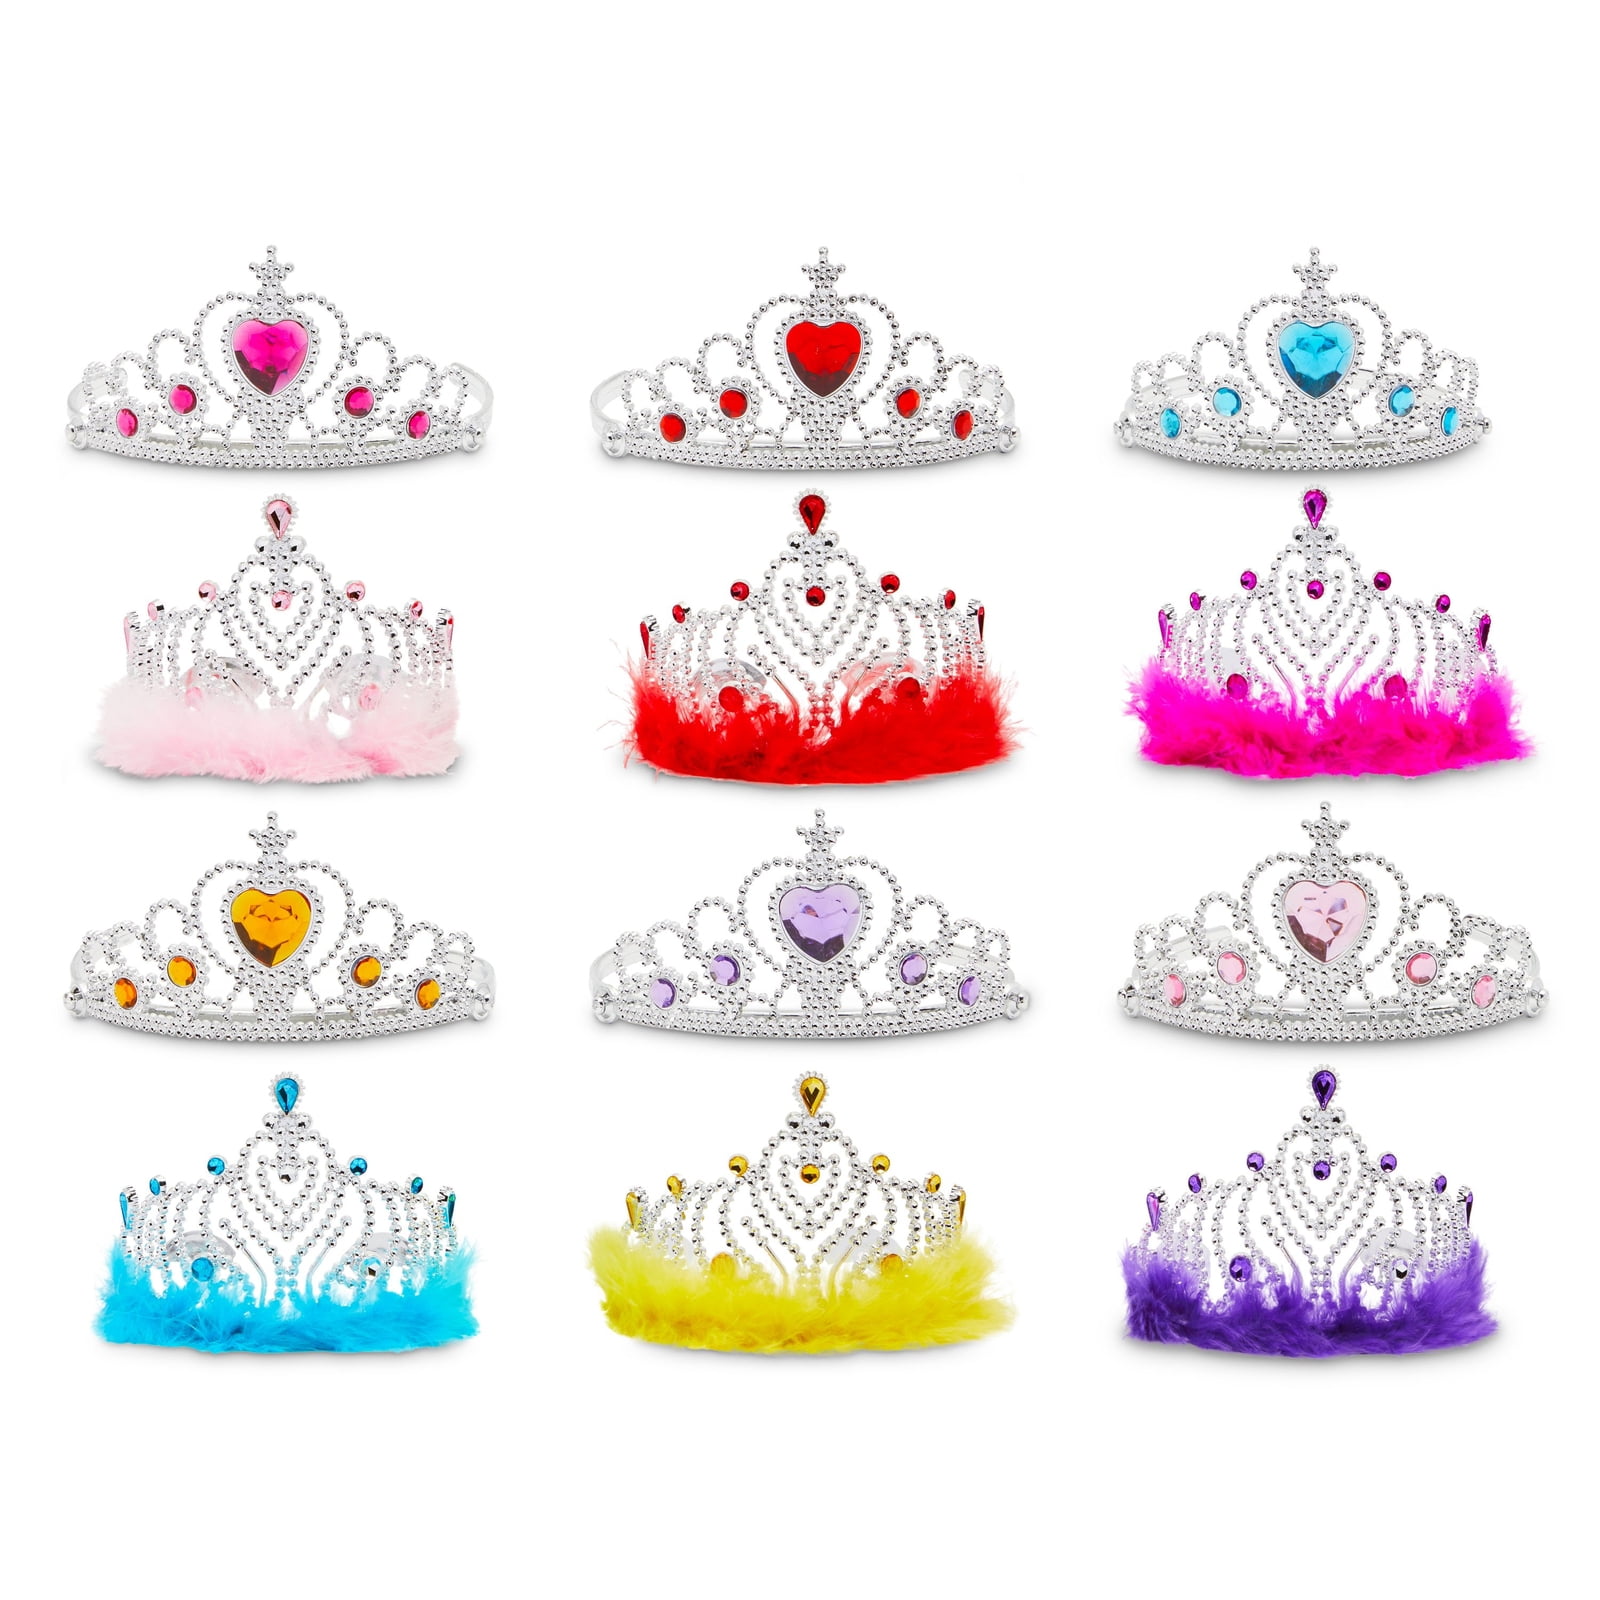 SOFIA THE FIRST Princess Birthday Party Crown Crowns Party Favor Princess Party Crown Favor Purple Sofia The First Princess Tiara Favor